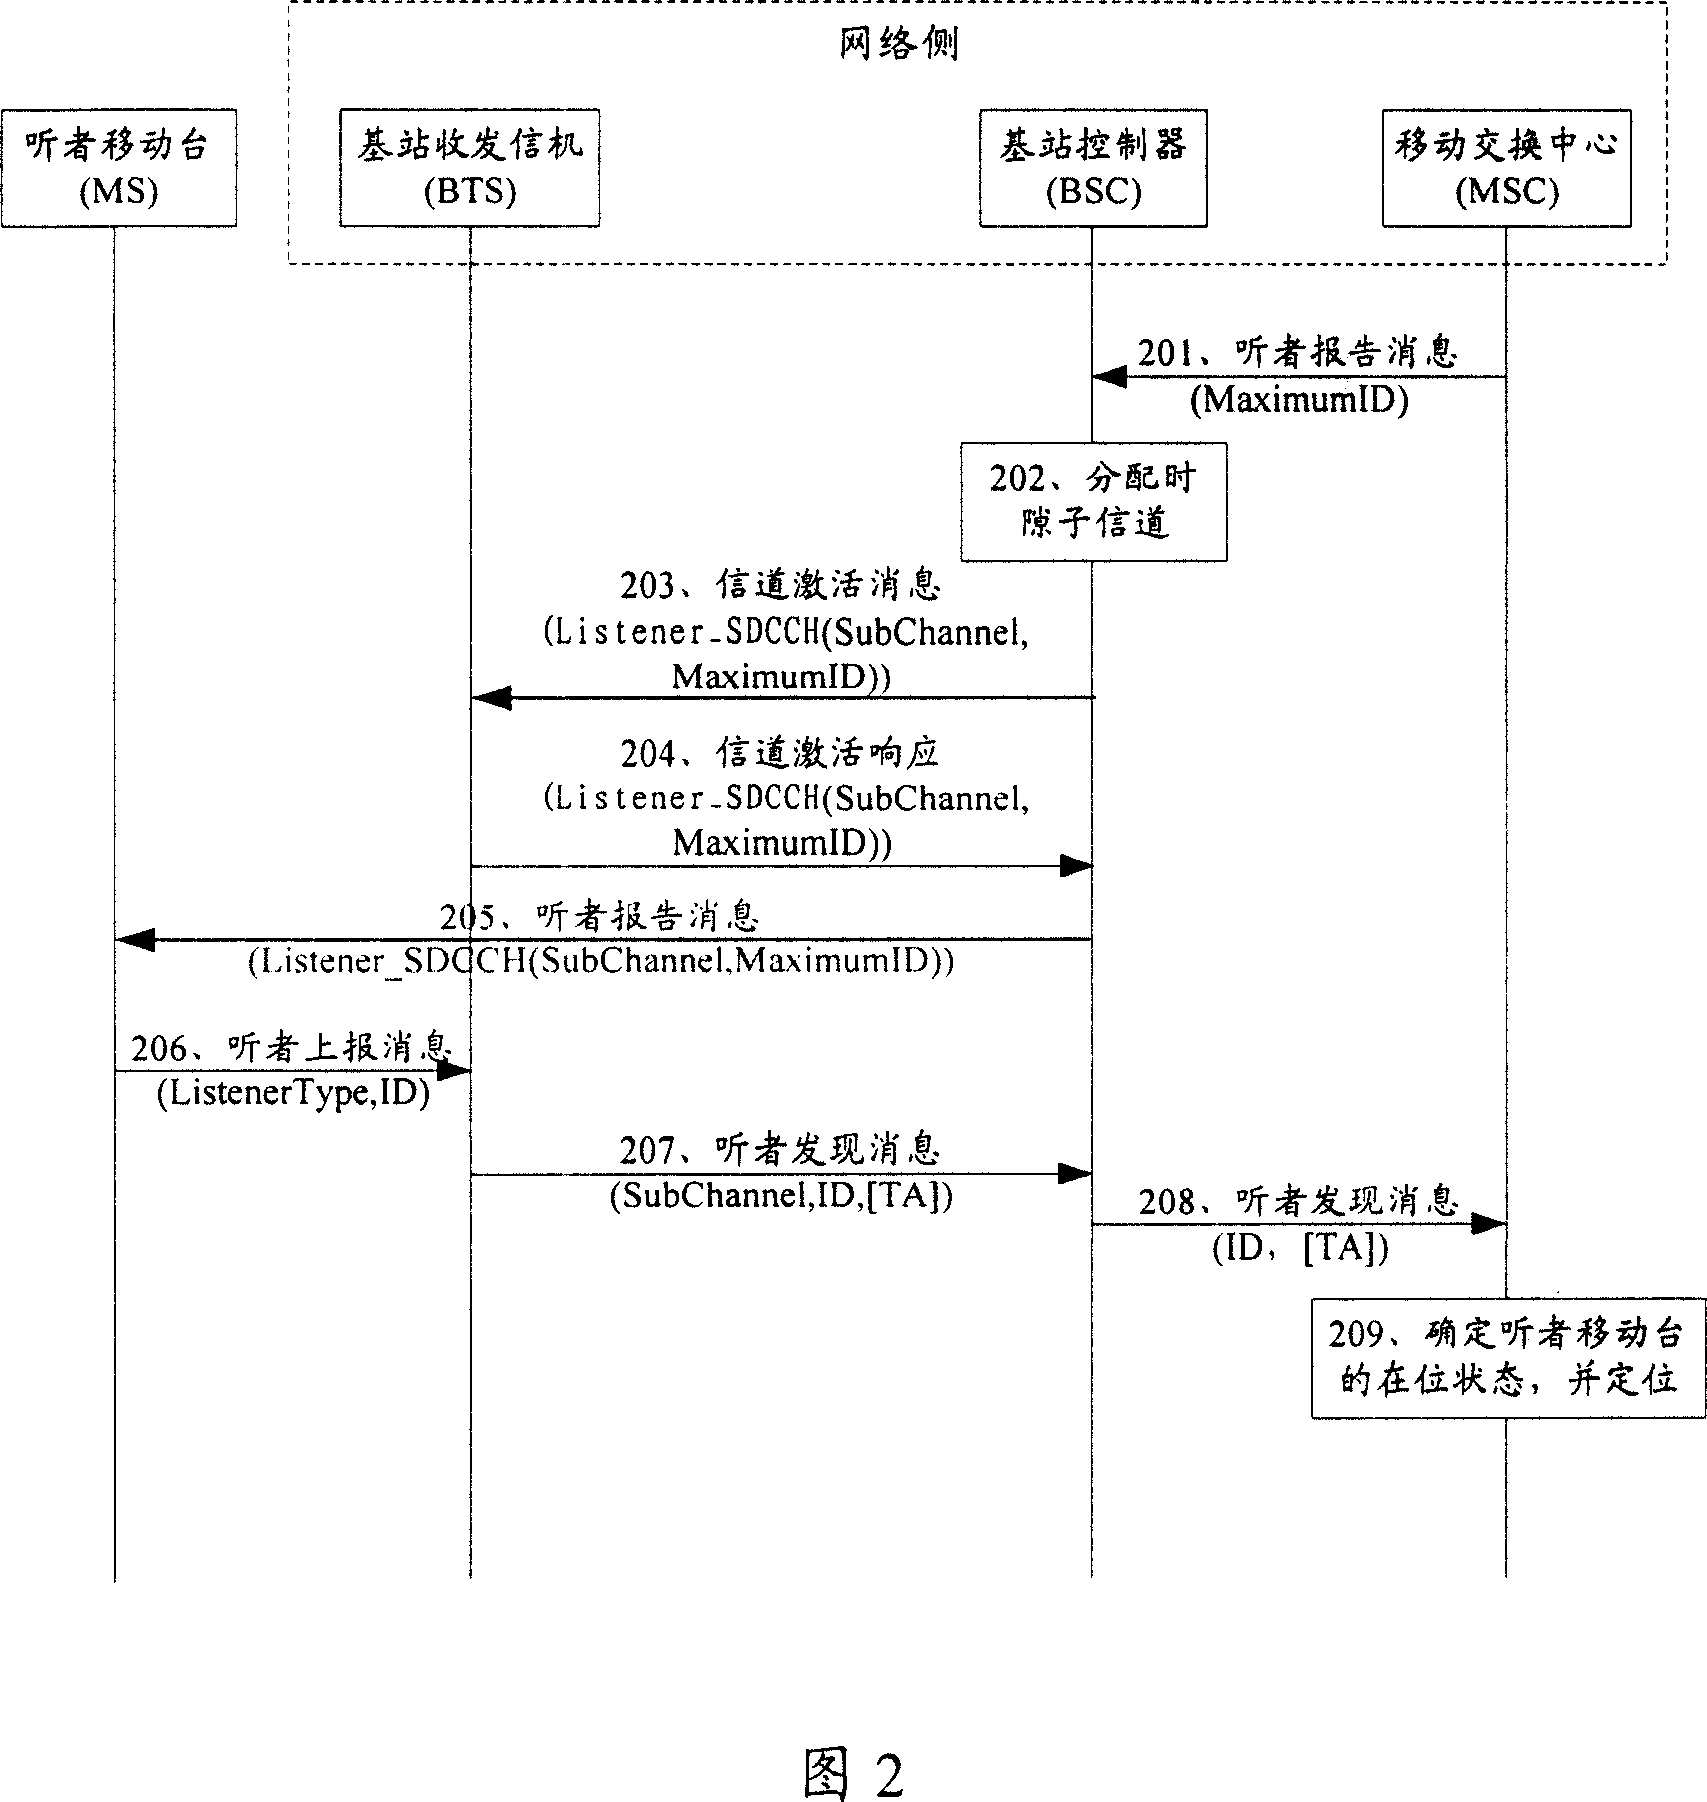 Method for obtaining hearing person movable station information from network in group calling/group playing procedure